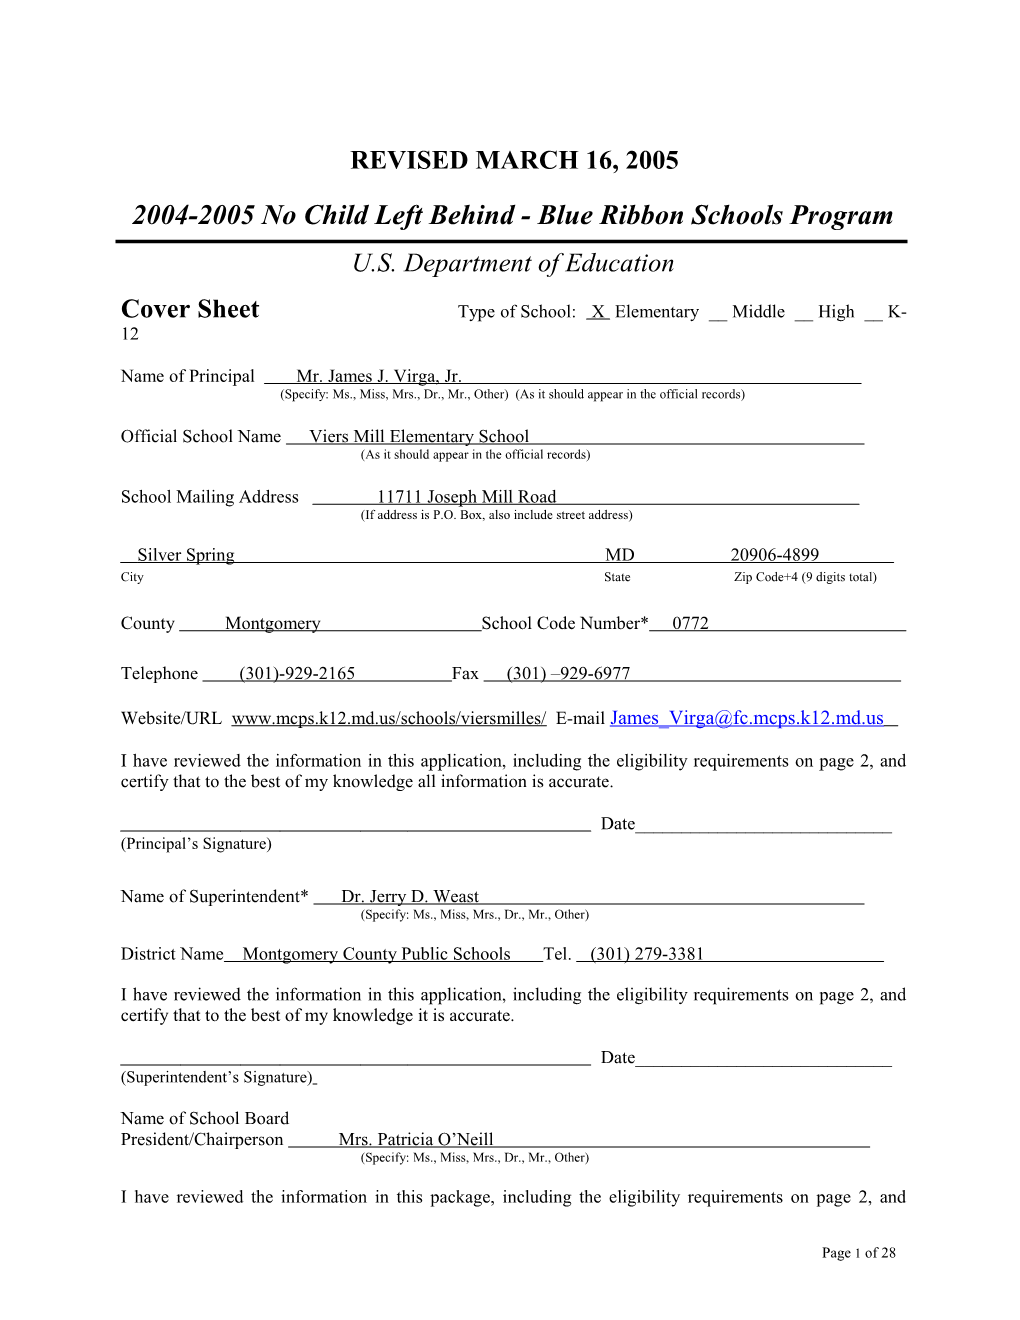 Viers Mill Elementary School Application: 2004-2005, No Child Left Behind - Blue Ribbon